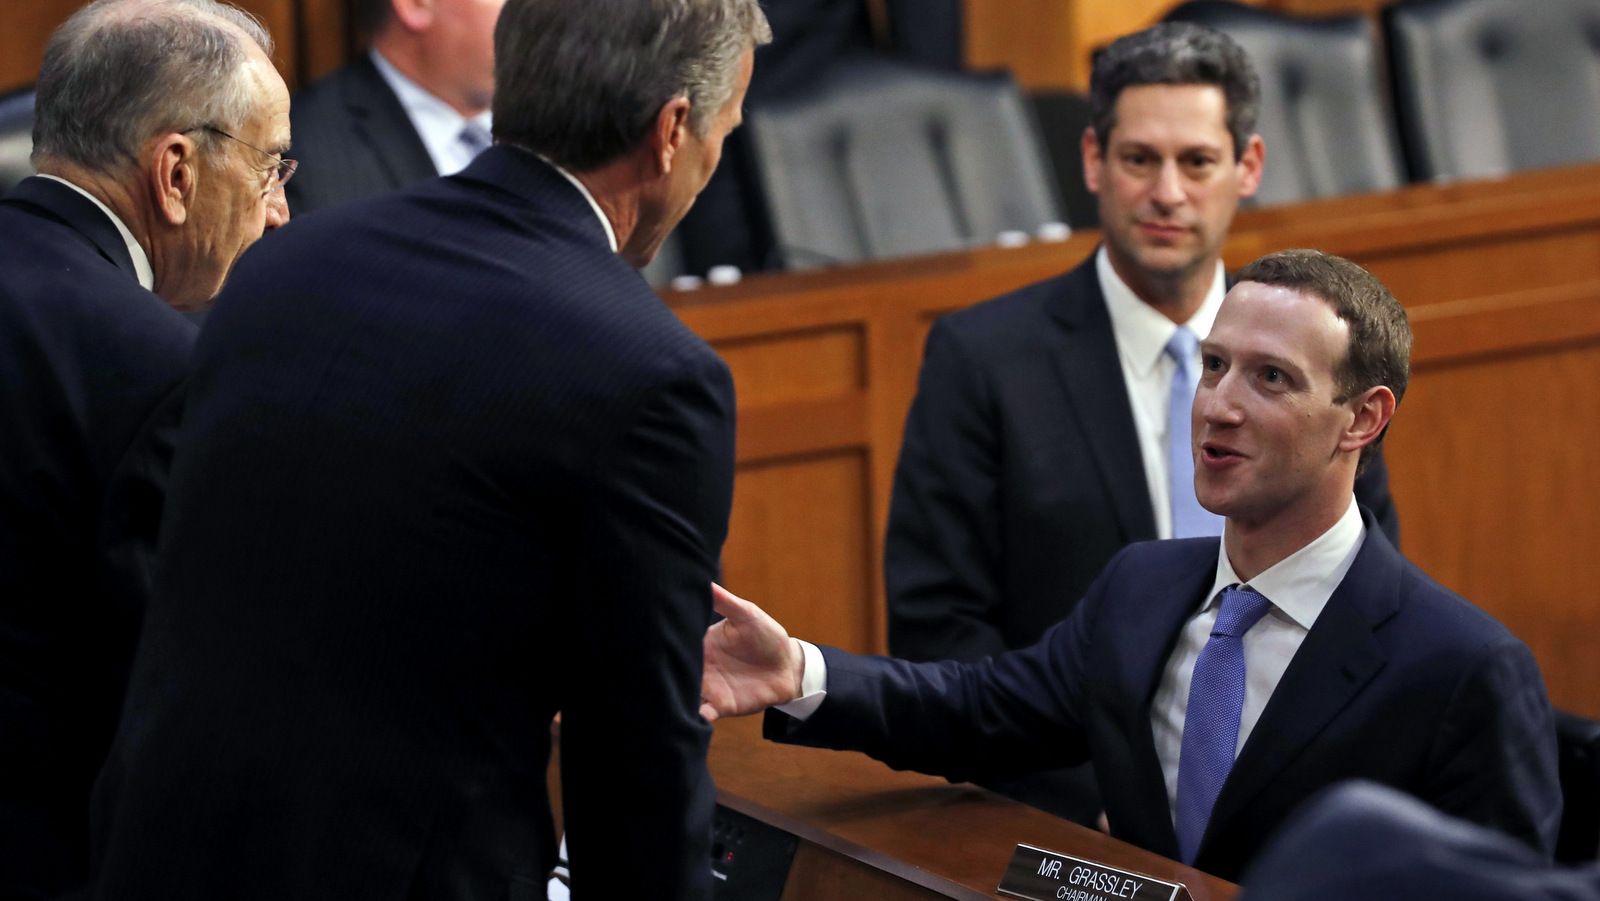 Facebook CEO Mark Zuckerberg meets with Senators Chuck Grassley, R-Iowa, left, and John Thune, R-S.D., after a Commerce and Judiciary Committees hearing in Washington, April 10, 2018. (AP/Alex Brandon)